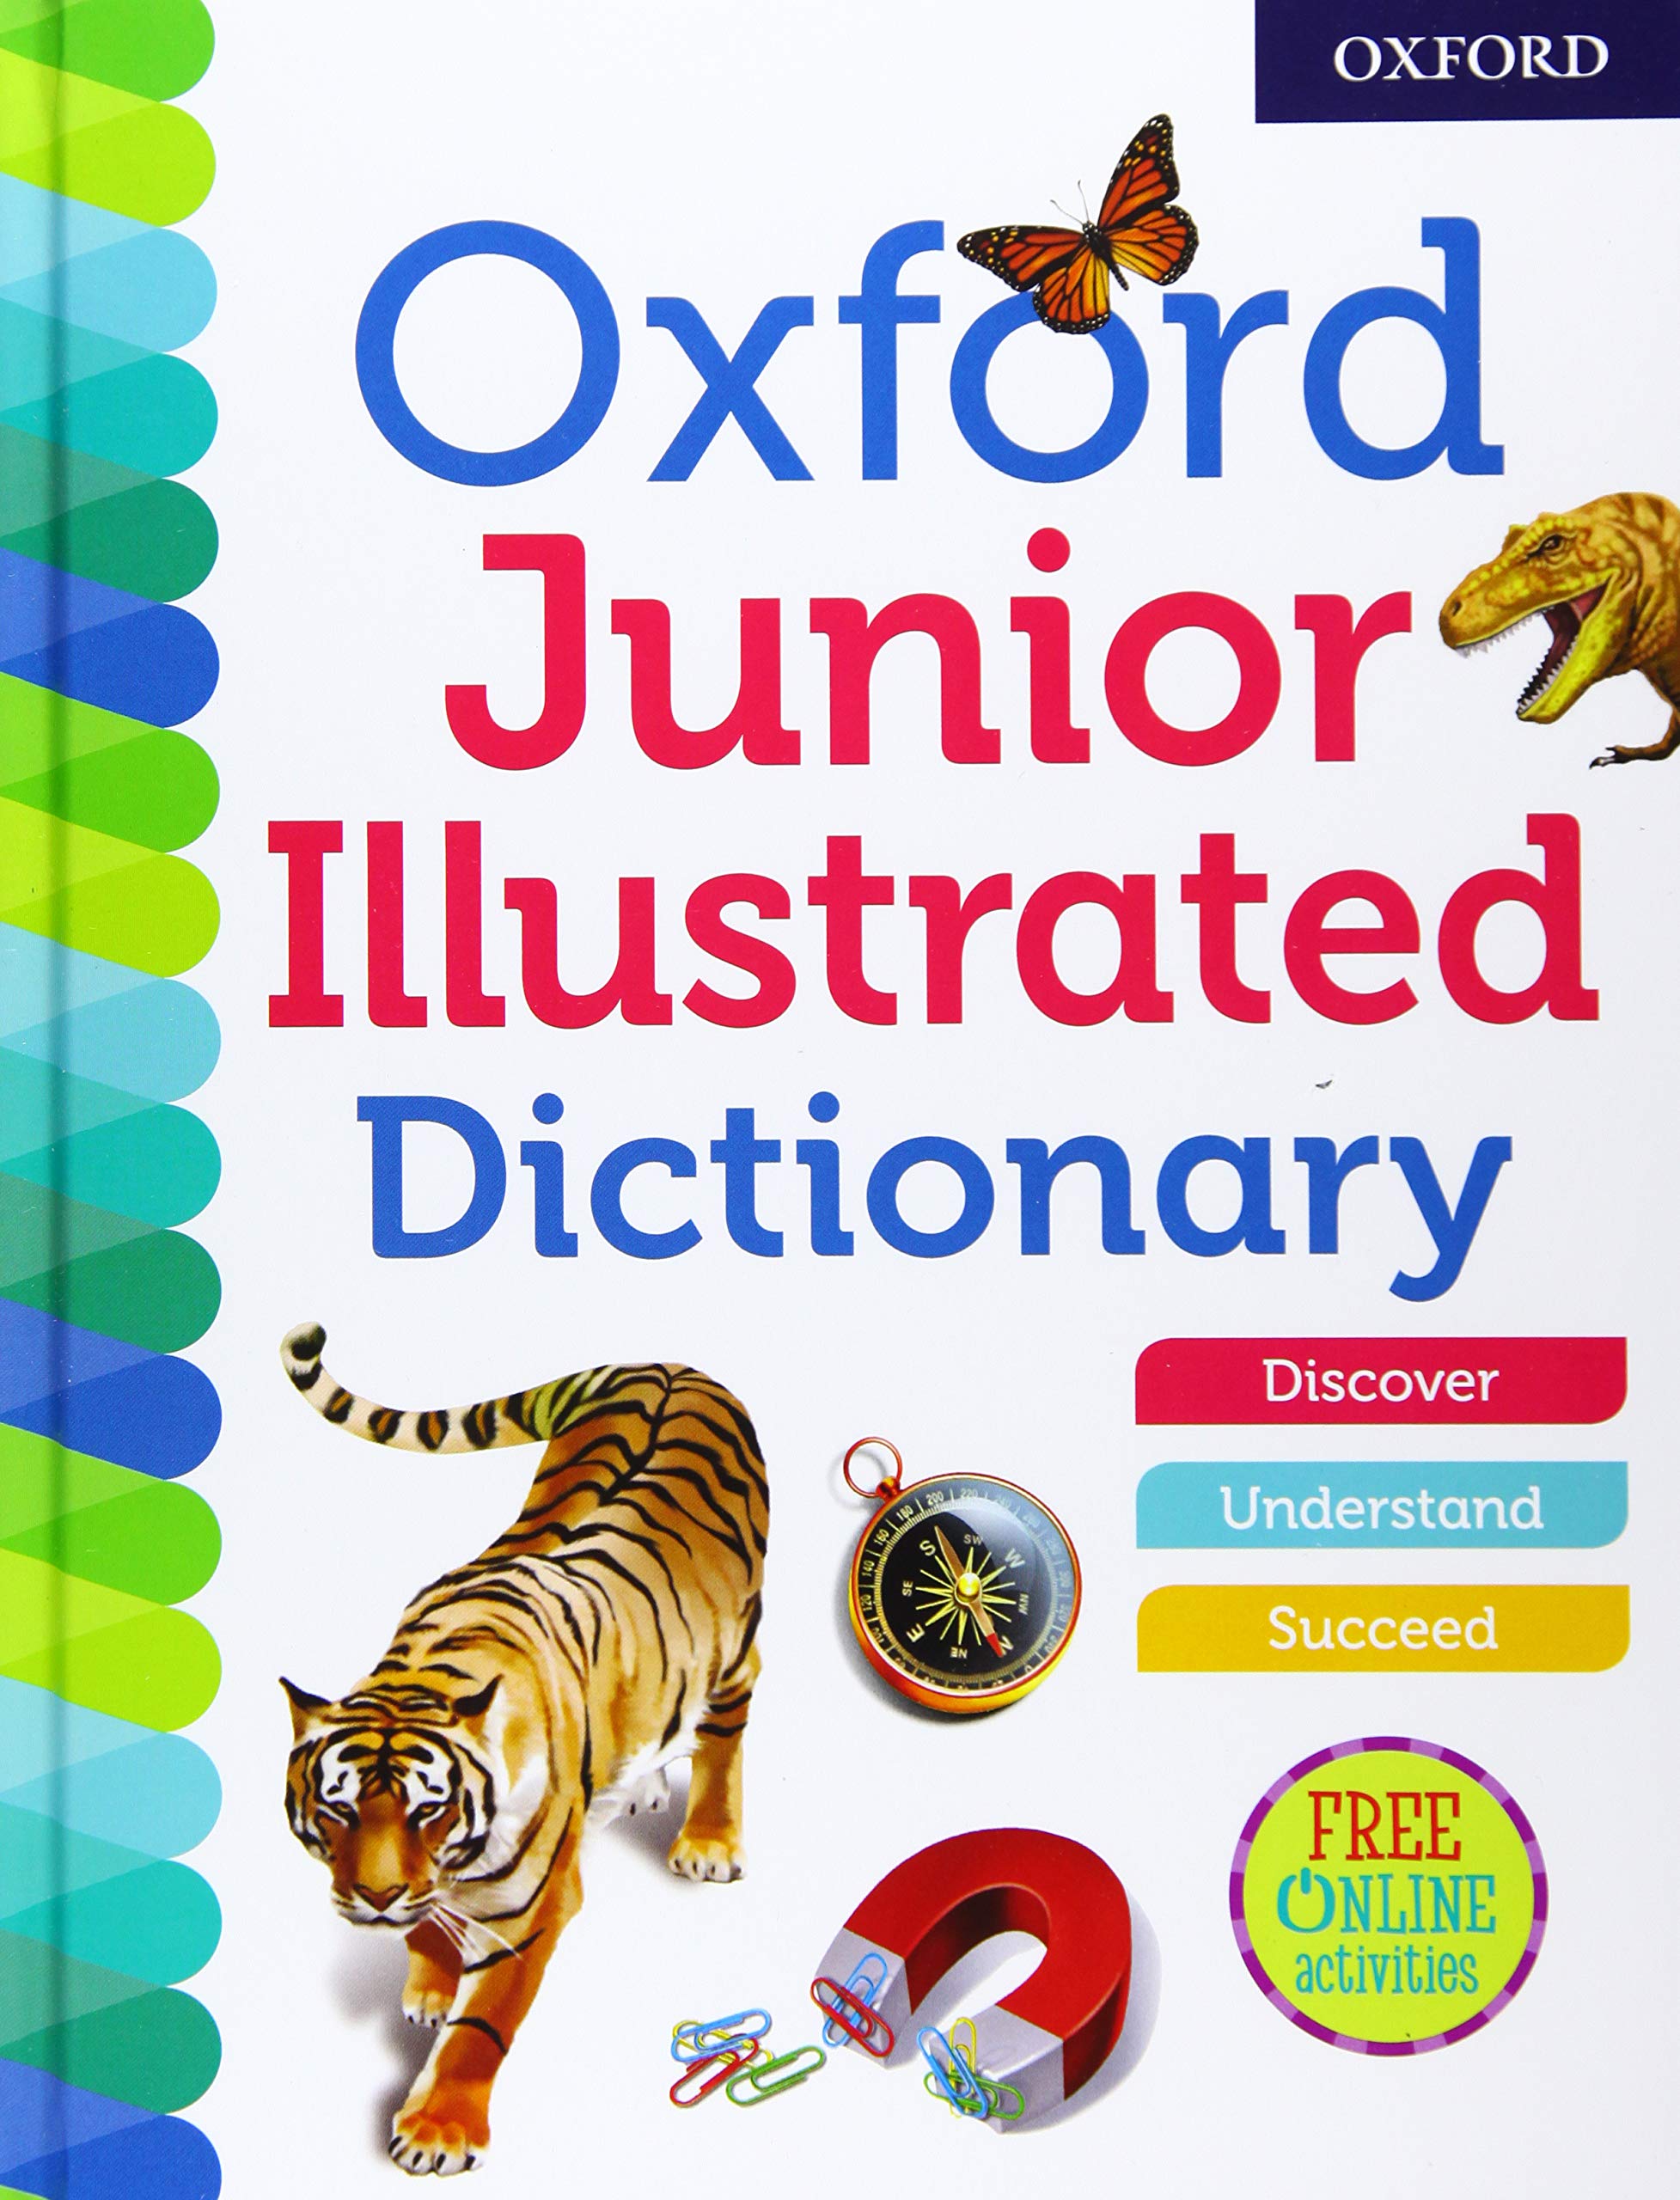 illustrated oxford dictionary pdf download